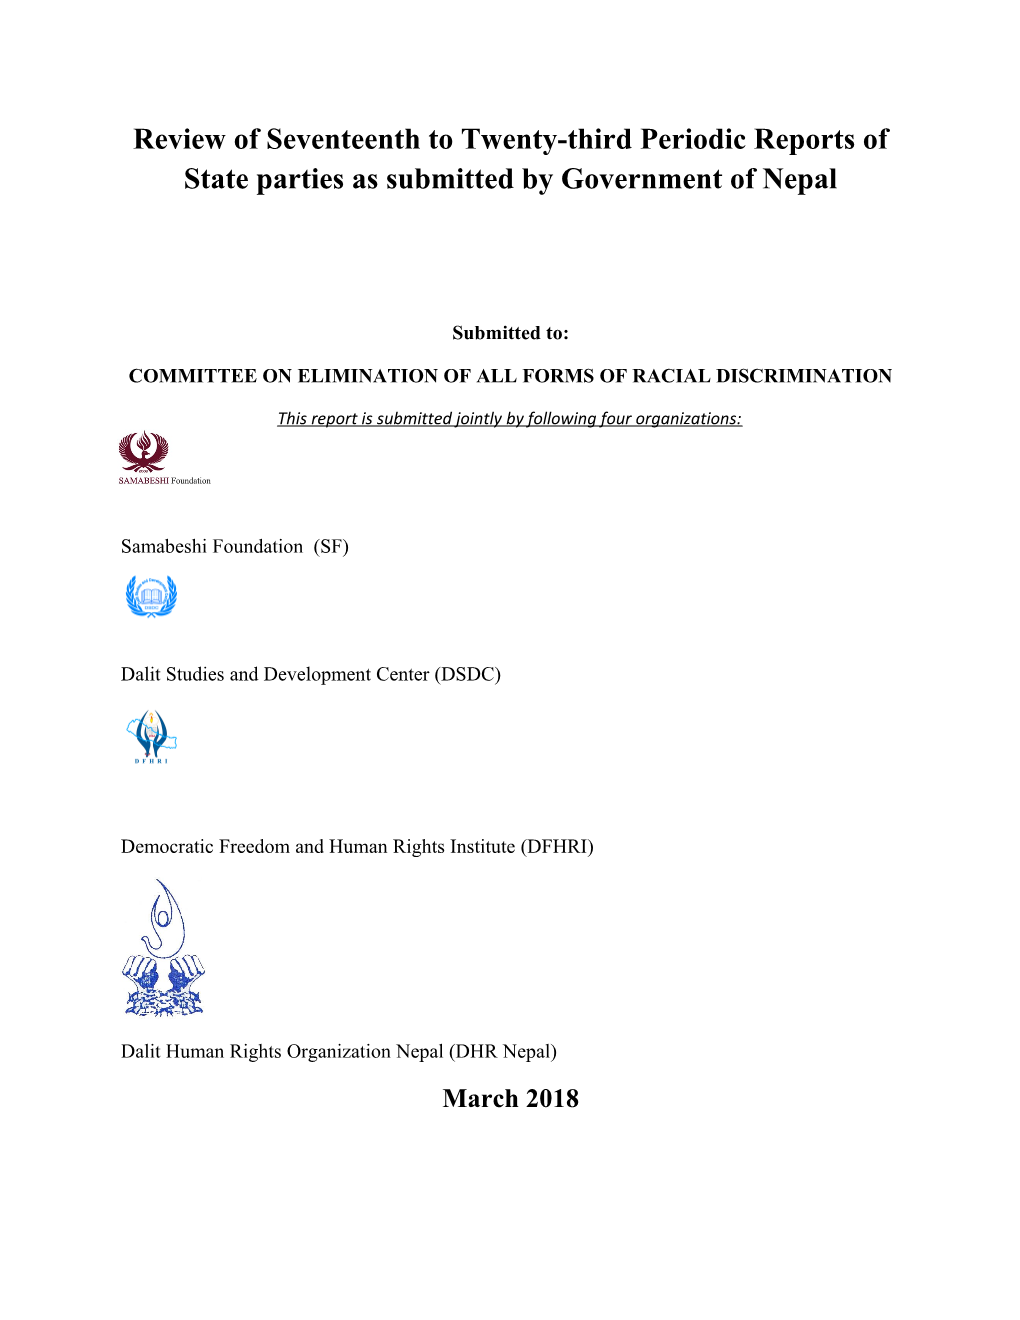 Review of Seventeenth to Twenty-Third Periodic Reports of State Parties As Submitted By